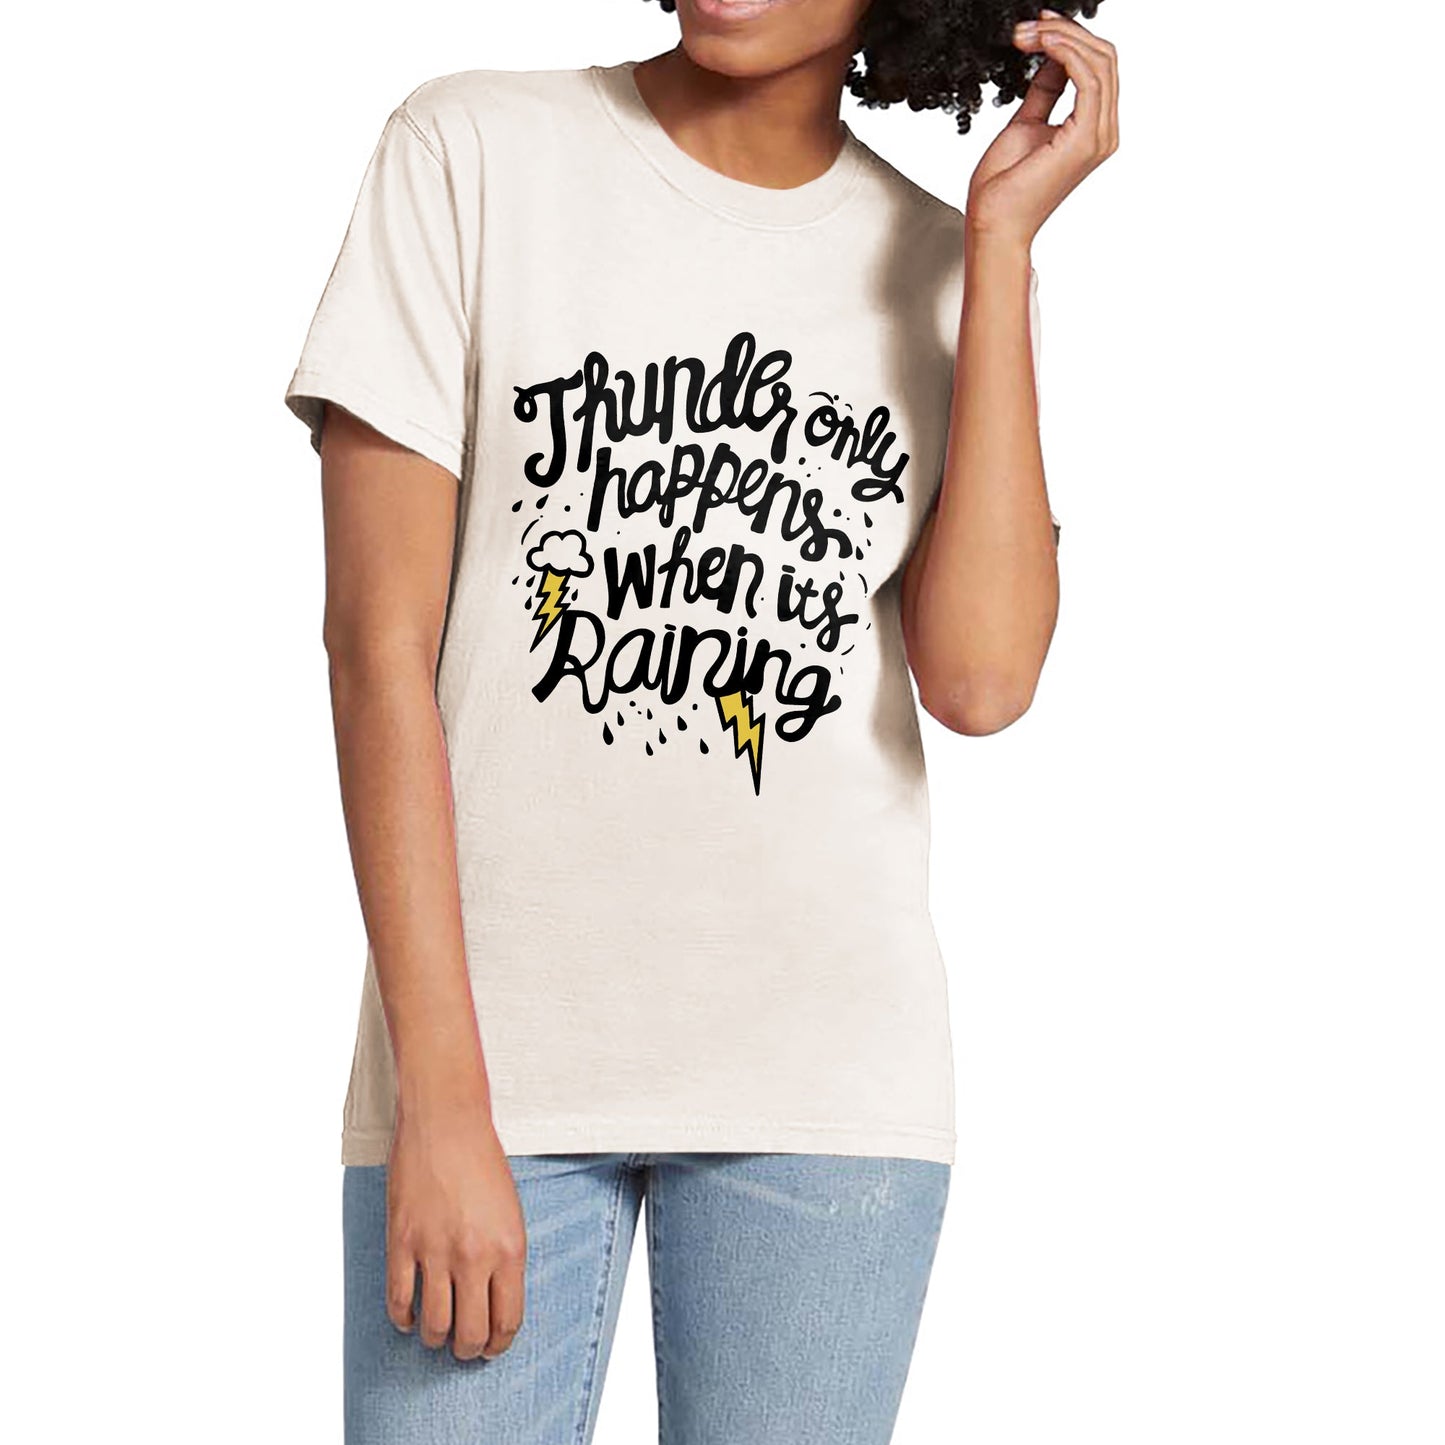 Thunder Only Happens Garment-Dyed Tee - Stories You Can Wear